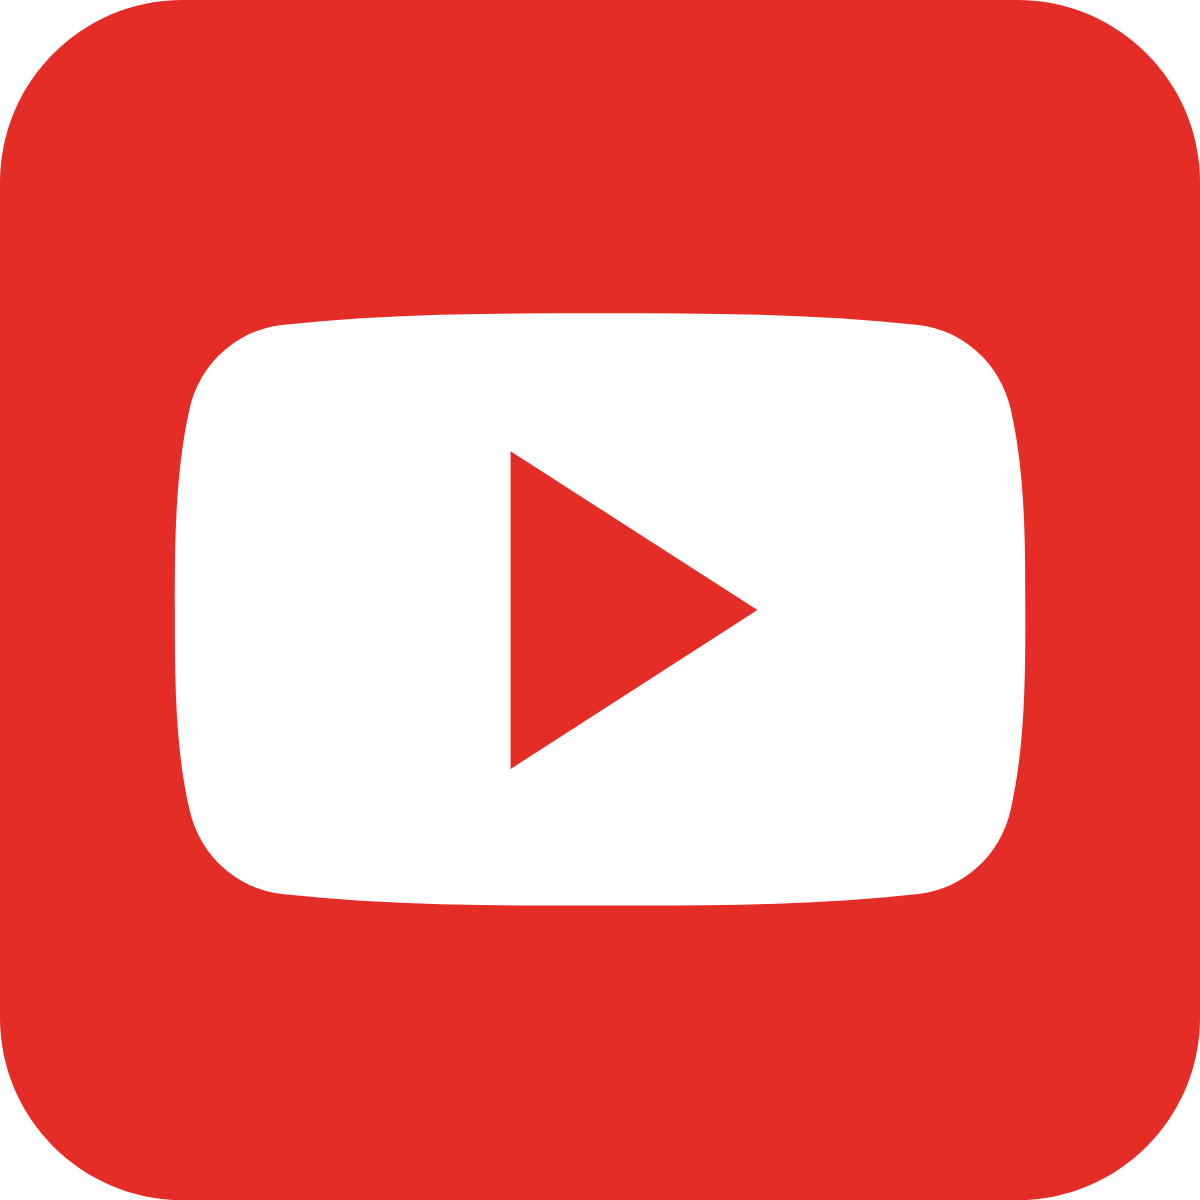 FC-Youtube-logo.png